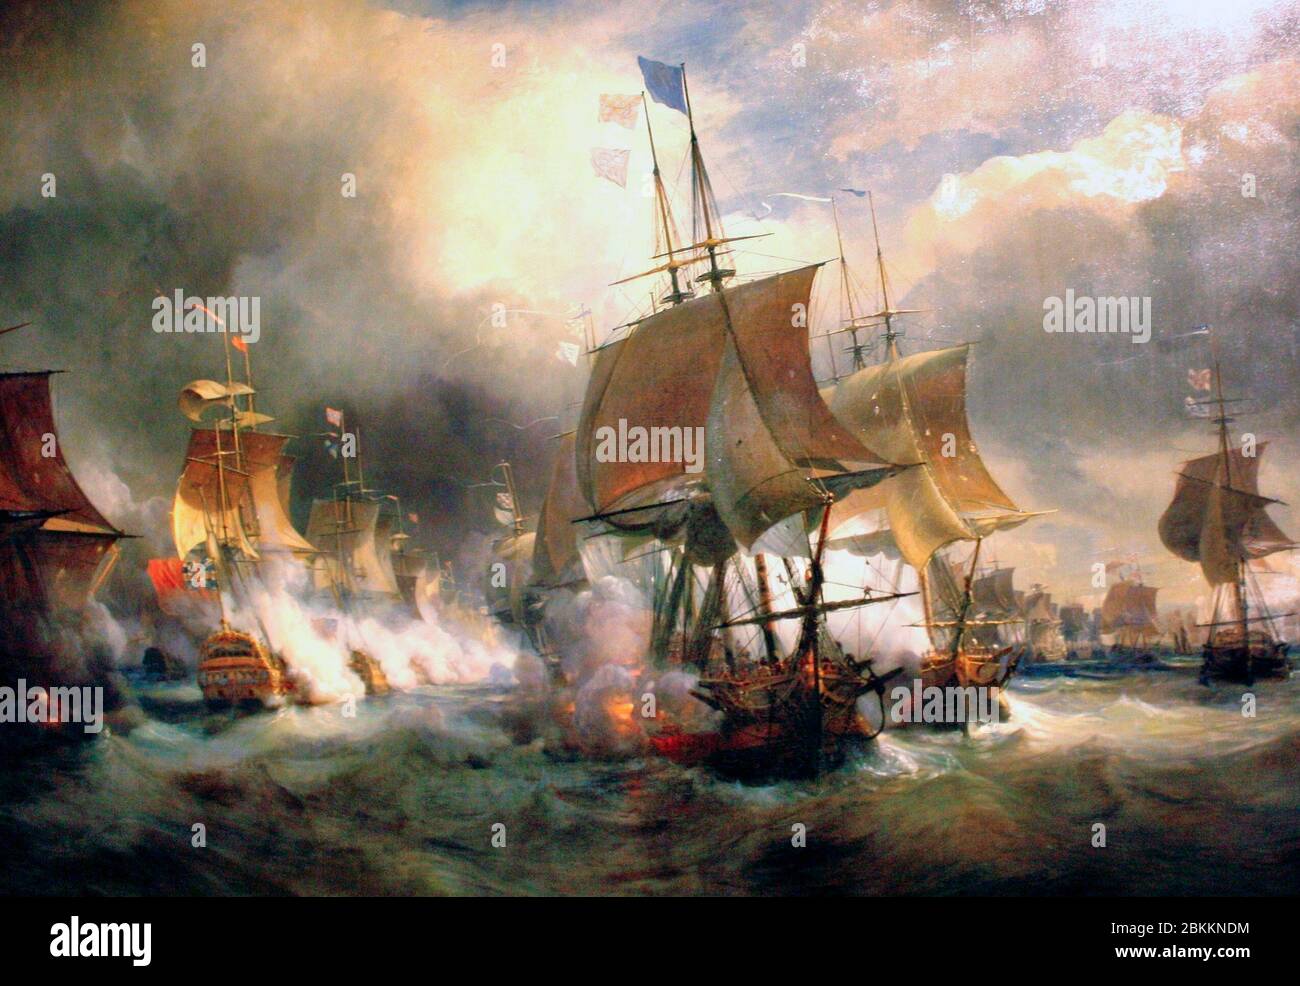 A painting depicting the 1778 Battle of Ushant - Theodore Gudin, 1848 Stock Photo